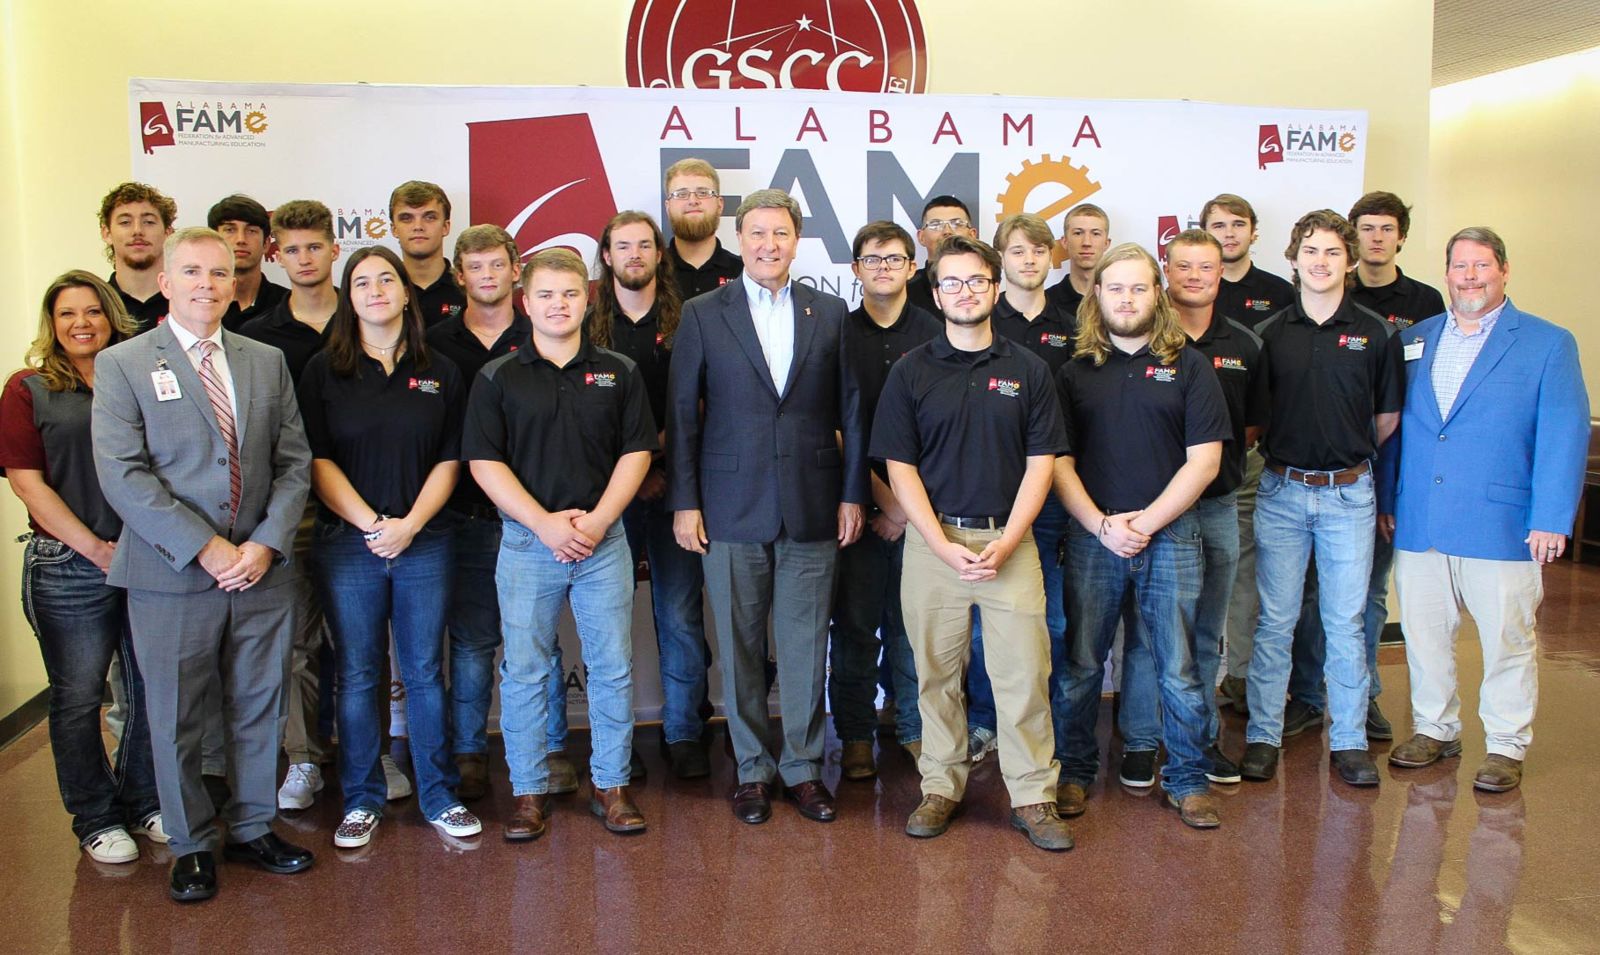 Congressman Mike Rogers is pictured with students, faculty and staff from the FAME program.